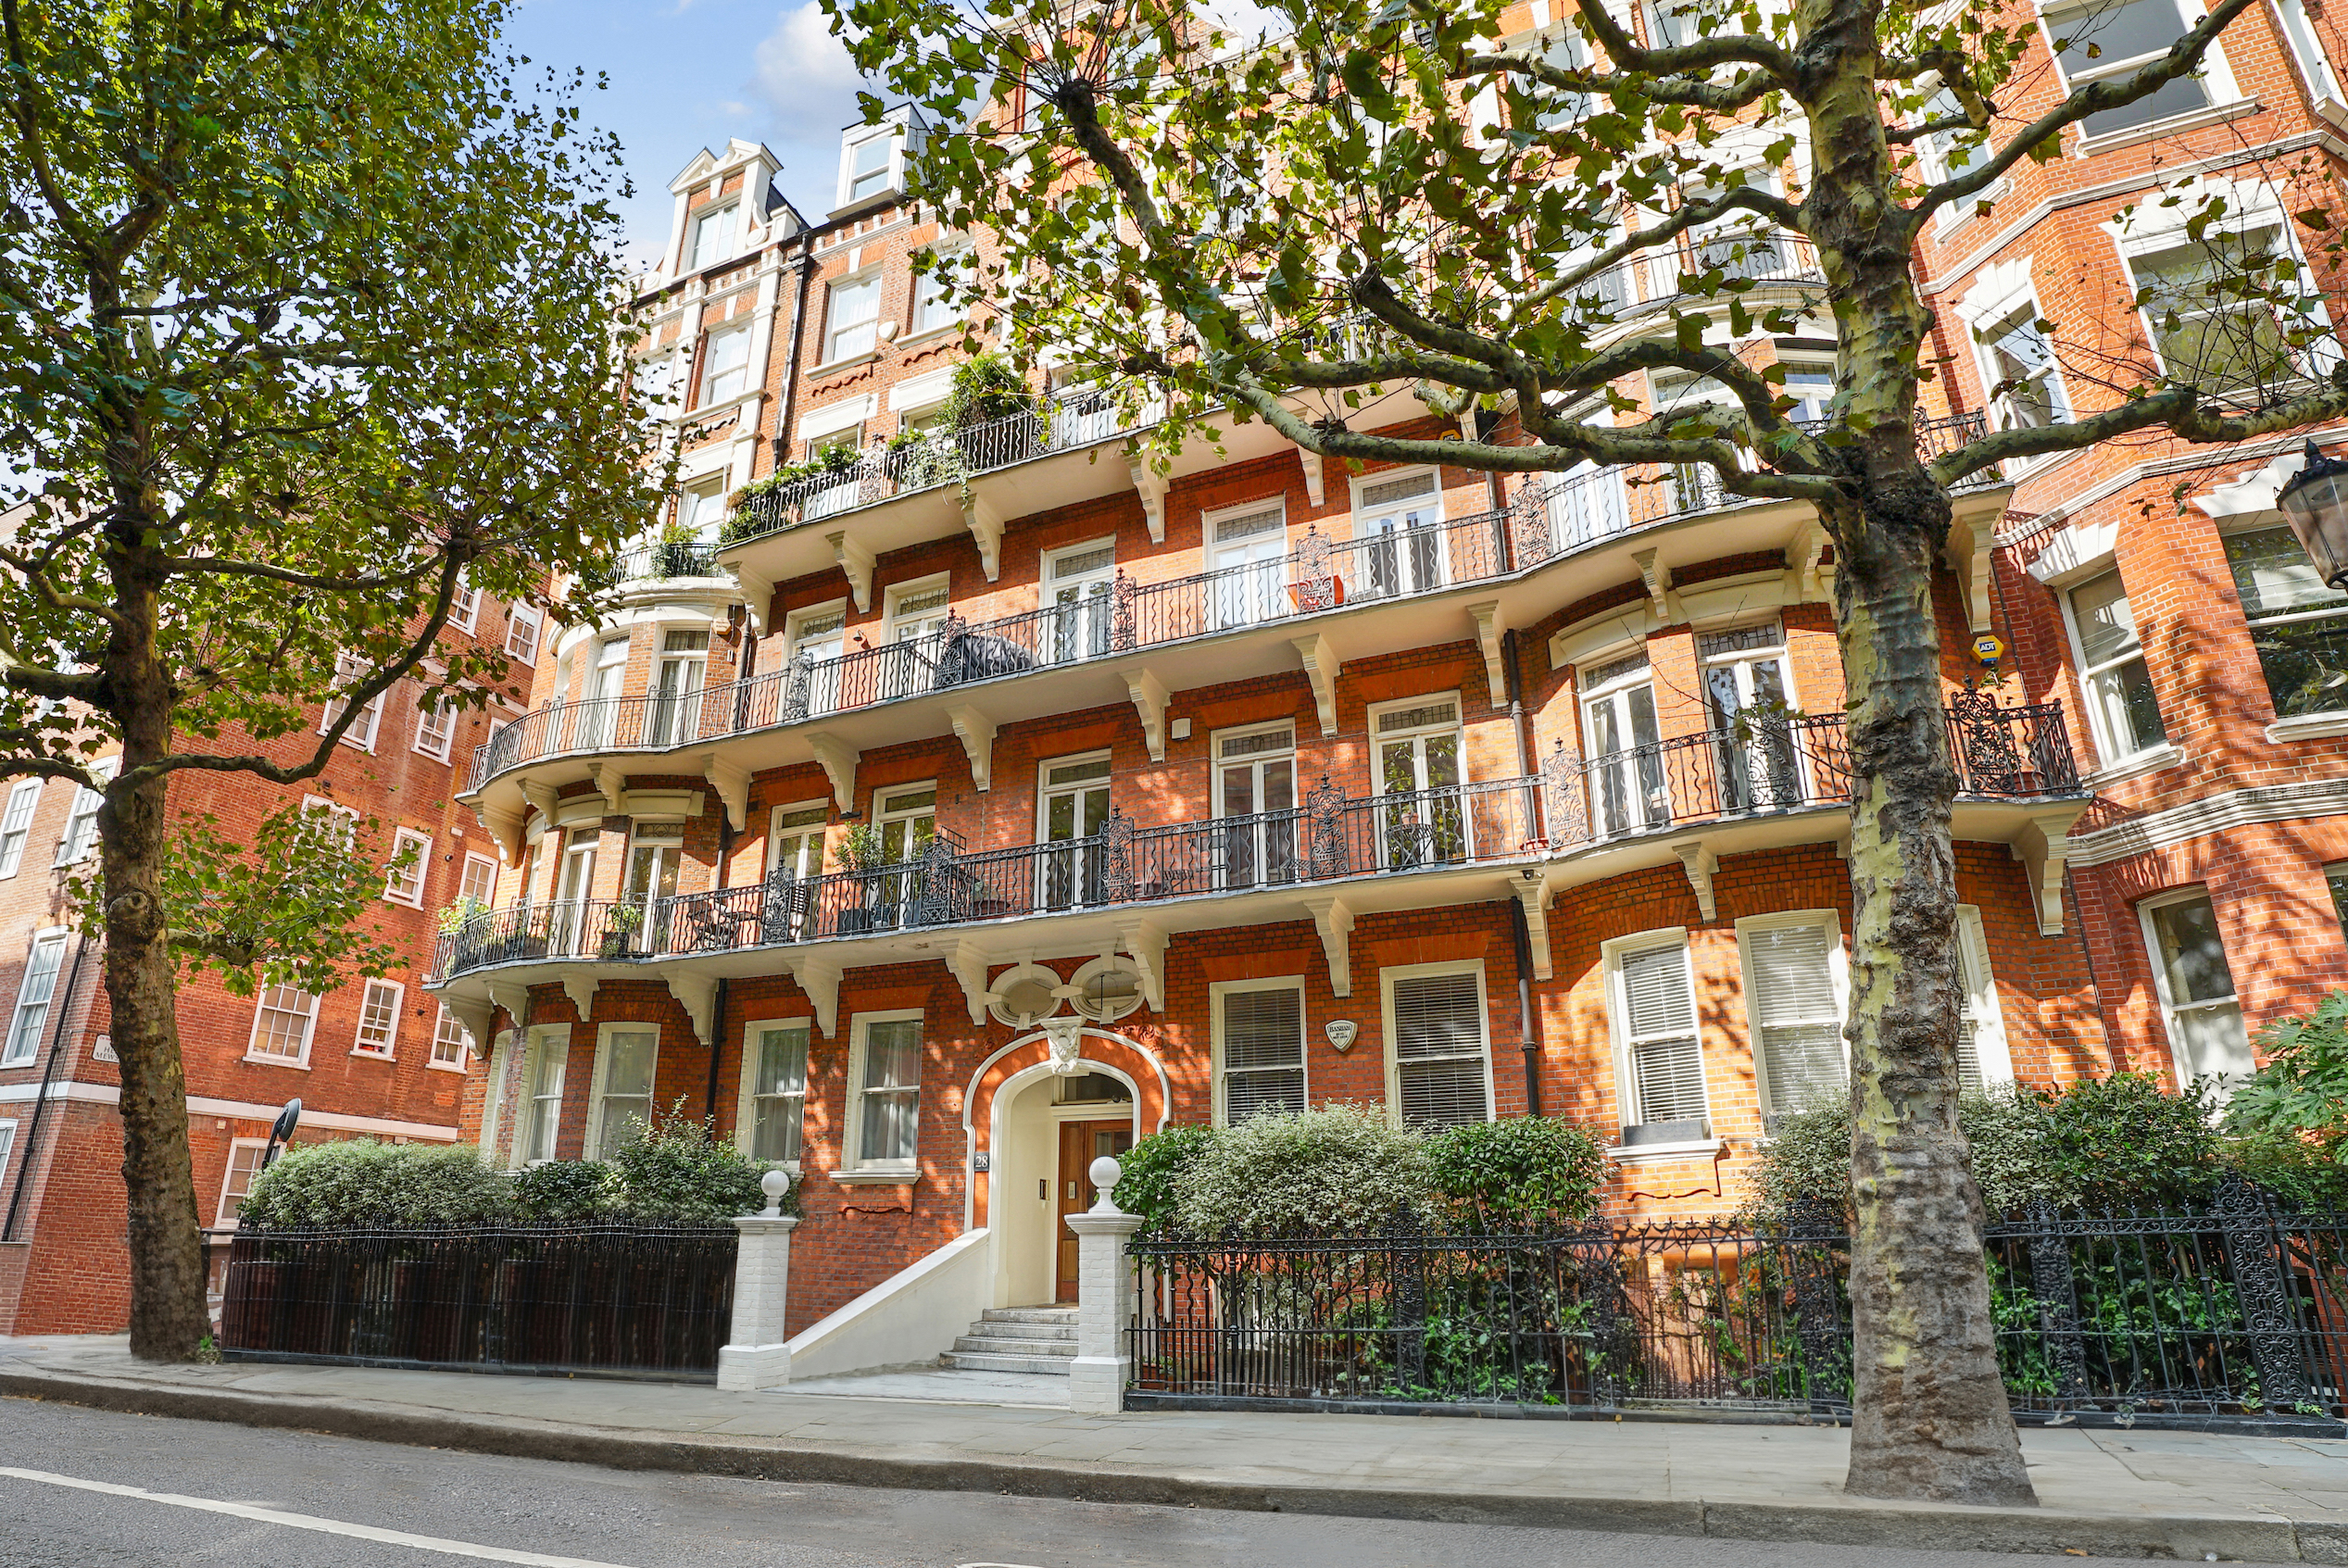 An exceptional three bedroom apartment on Bramham Gardens